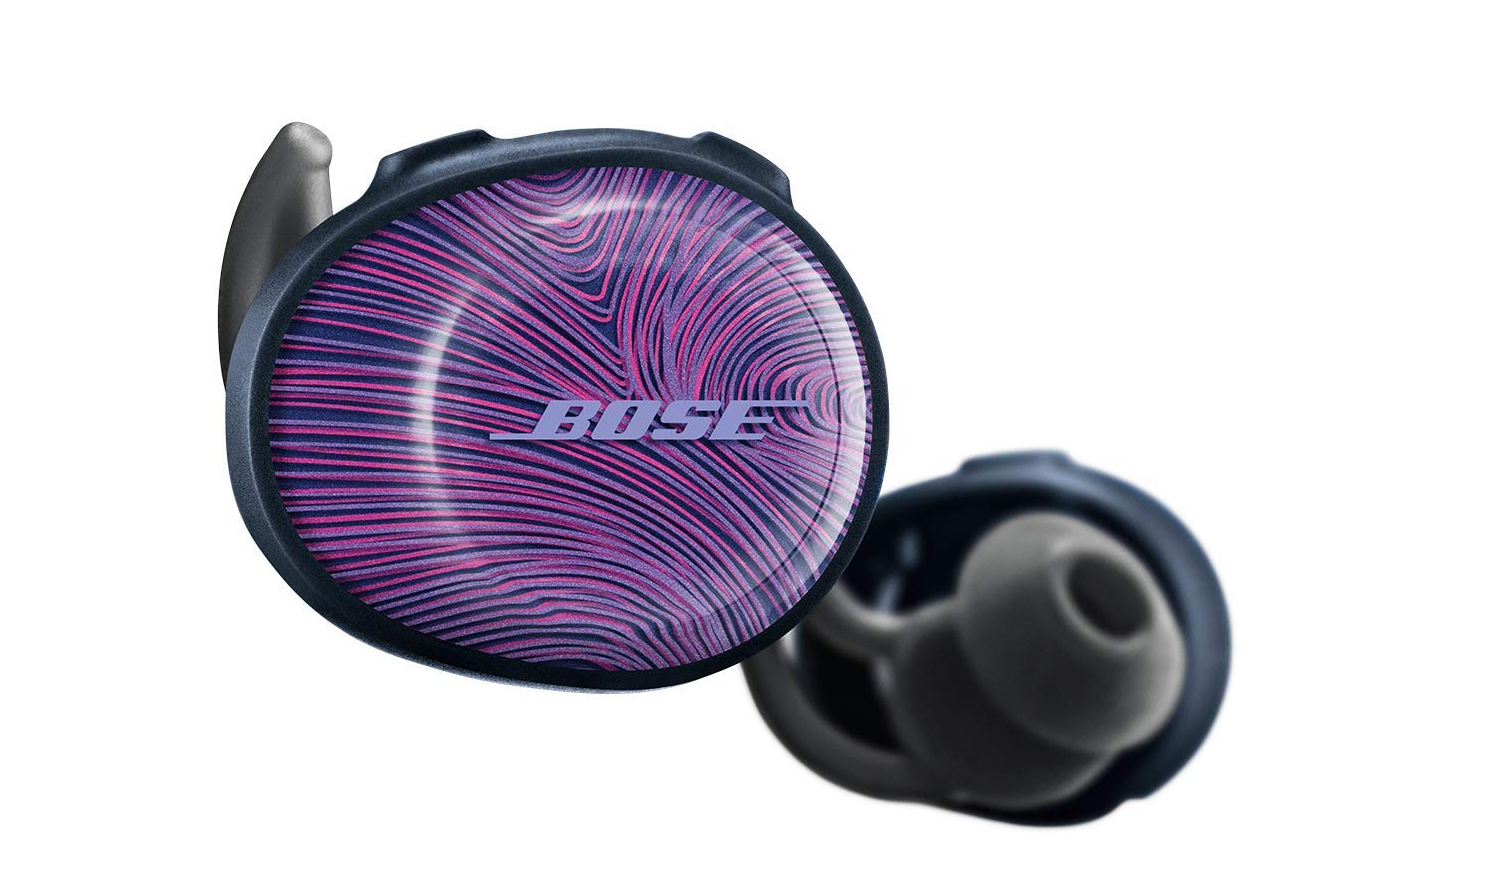 Grab a pair of Bose SoundSport wireless earbuds eye-catching Ultraviolet for $139 ($60 off)